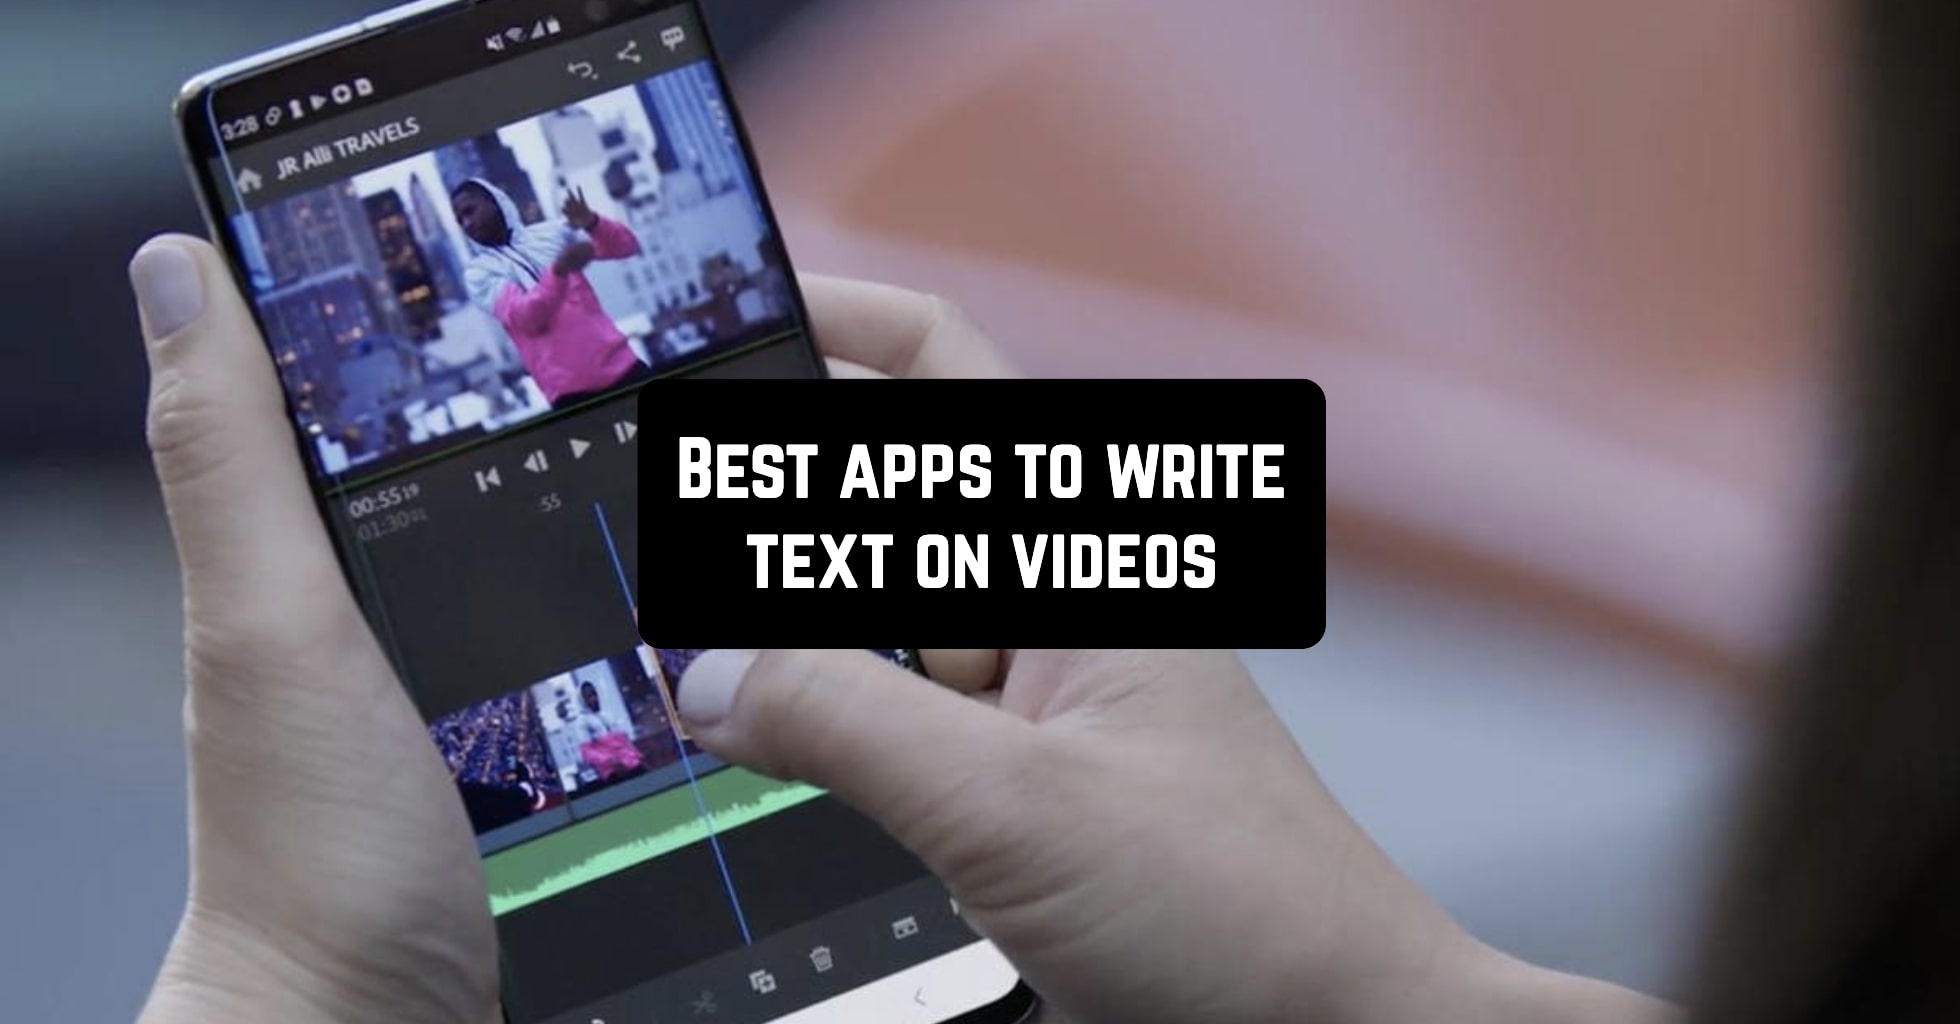 11 Best apps to write text on videos (Android & iOS)